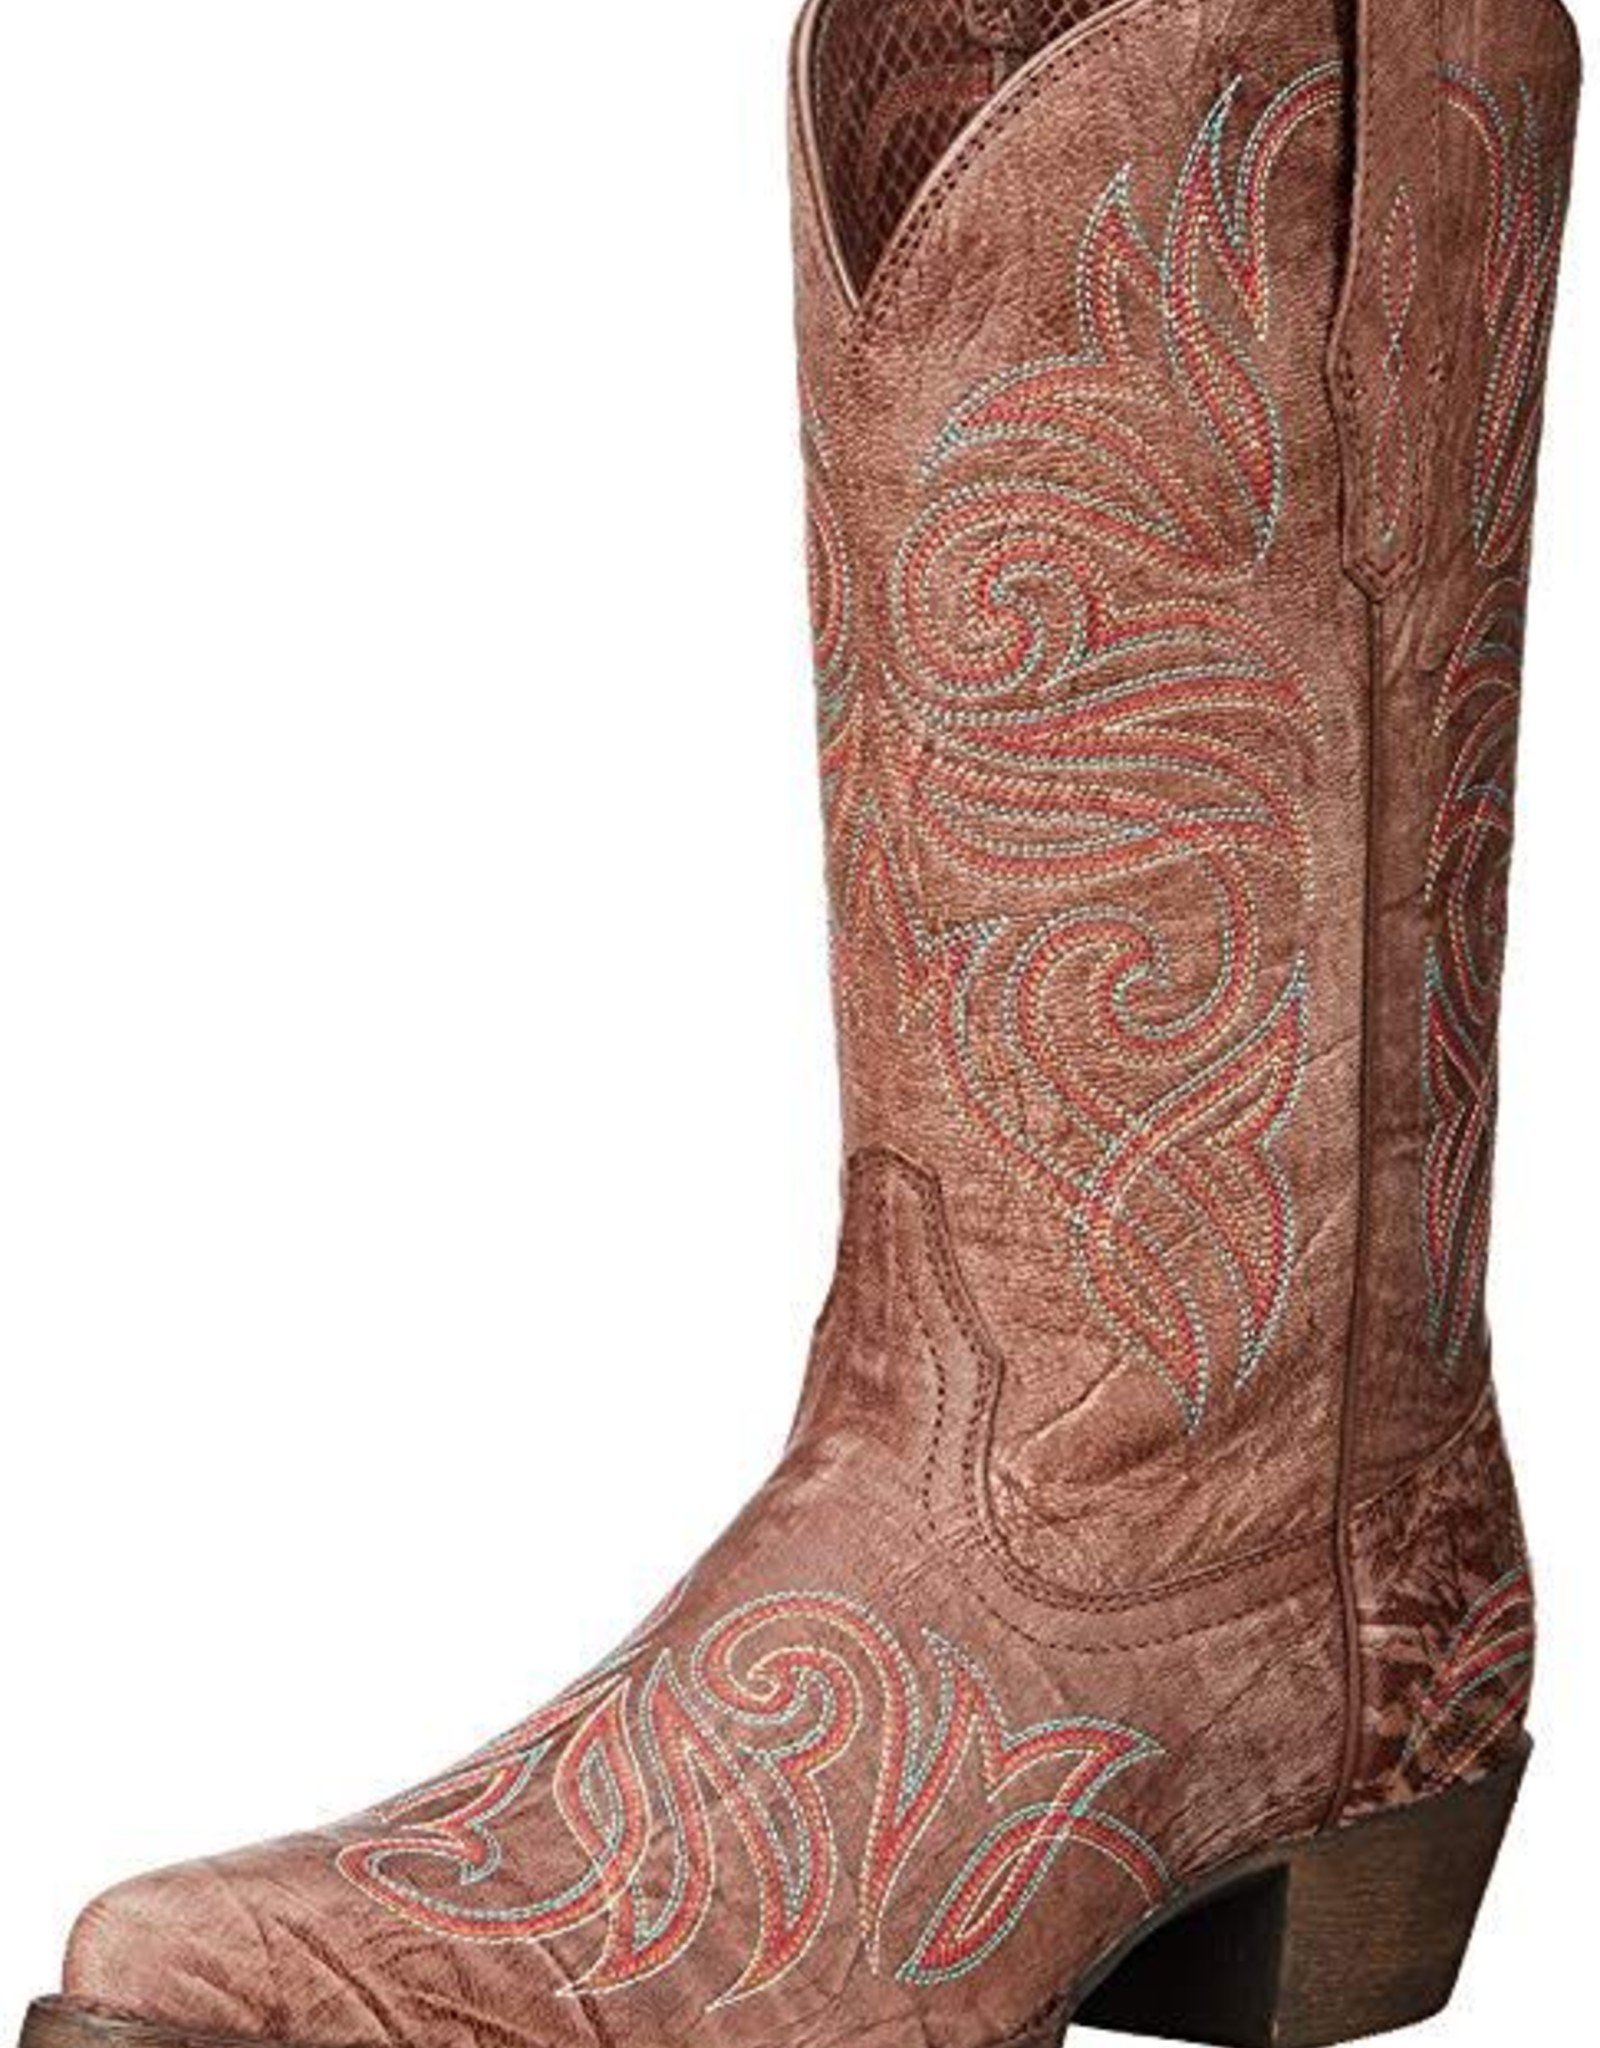 Ariat Ariat Round Up J Toe Womens Boot - Burnished Brown -Size 7.0